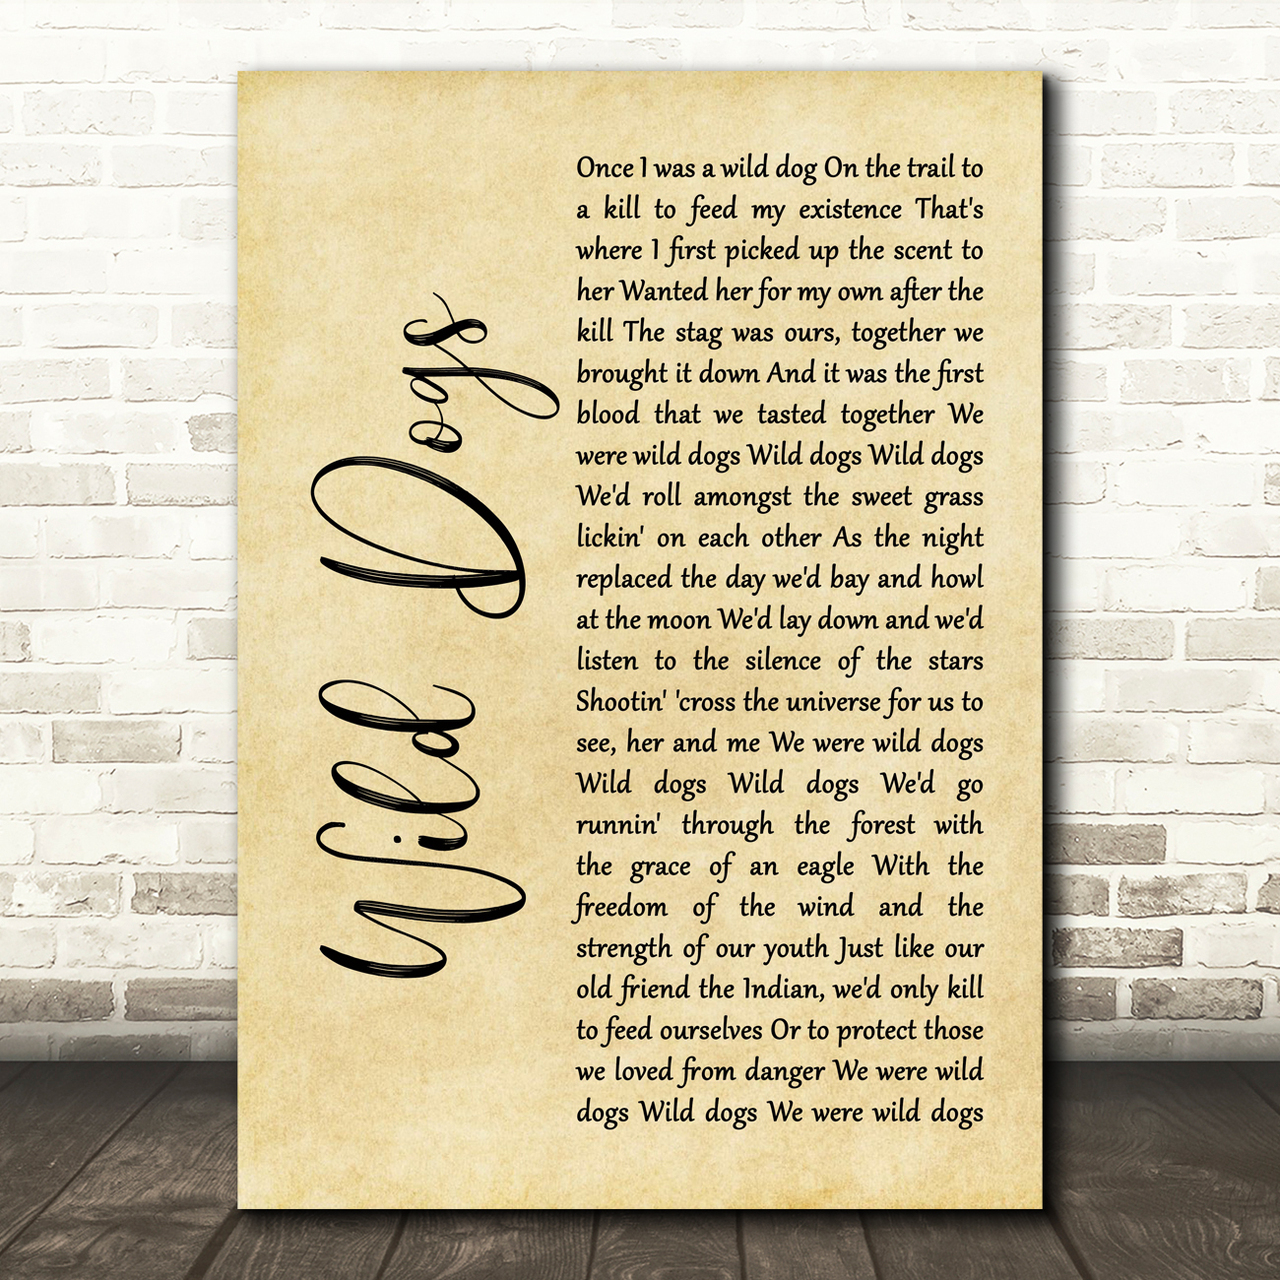 Colter Wall Wild Dogs Rustic Script Song Lyric Wall Art Print